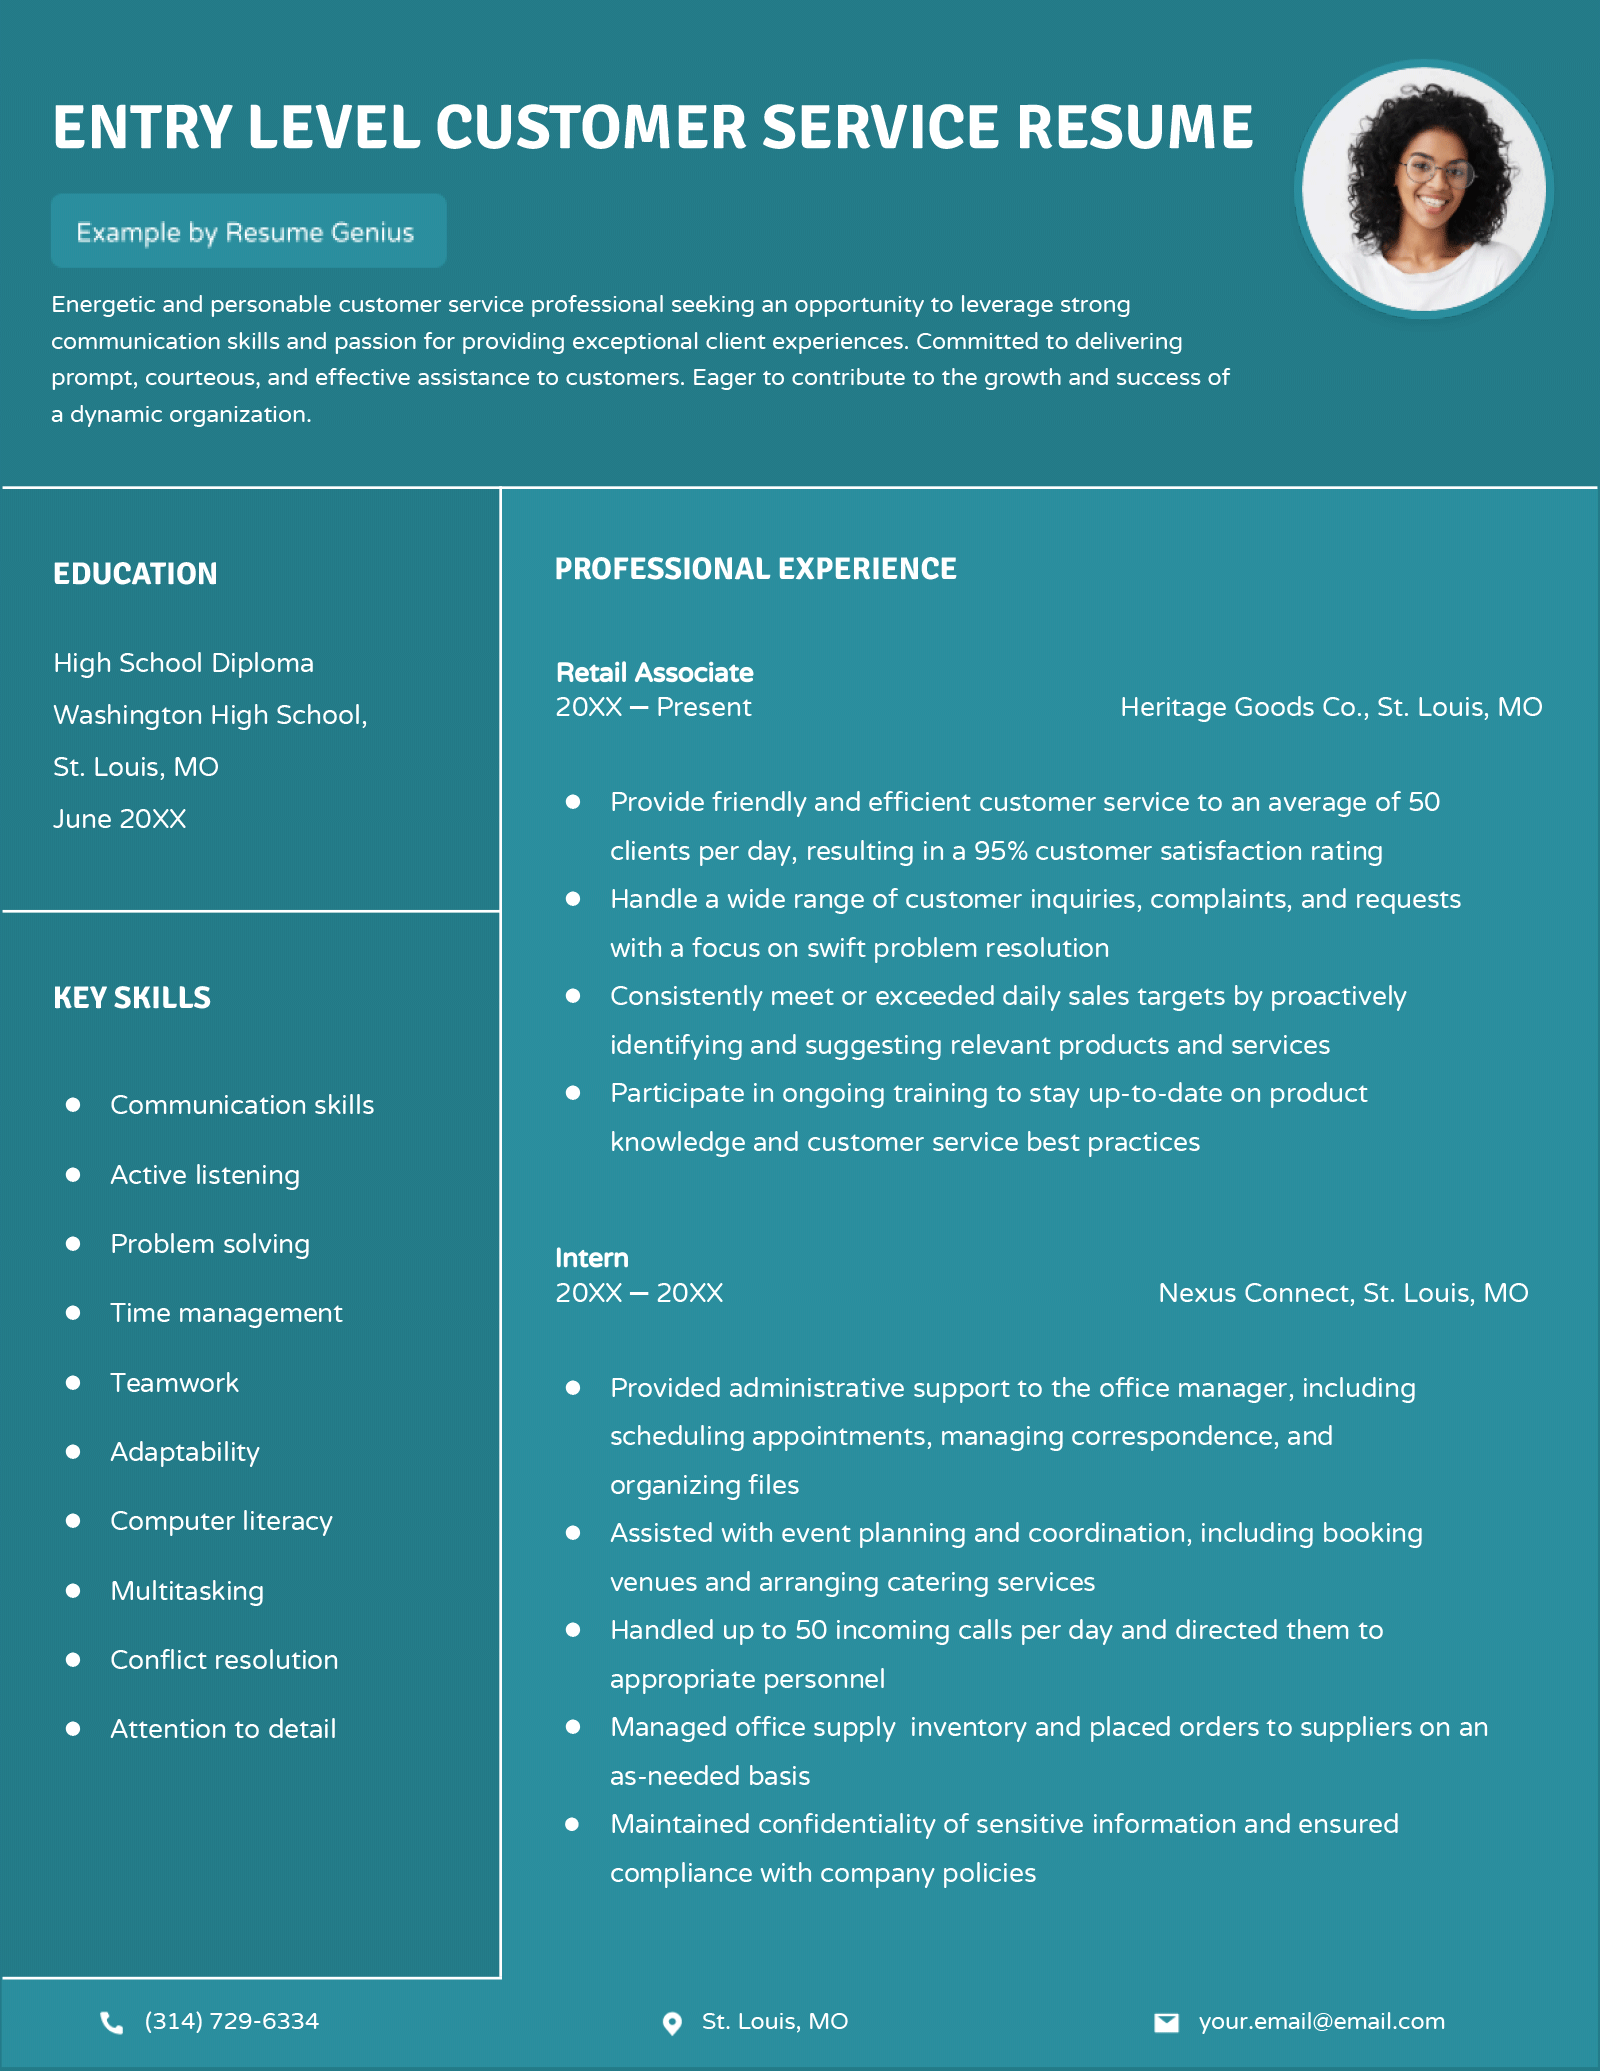 An entry-level customer service resume example.